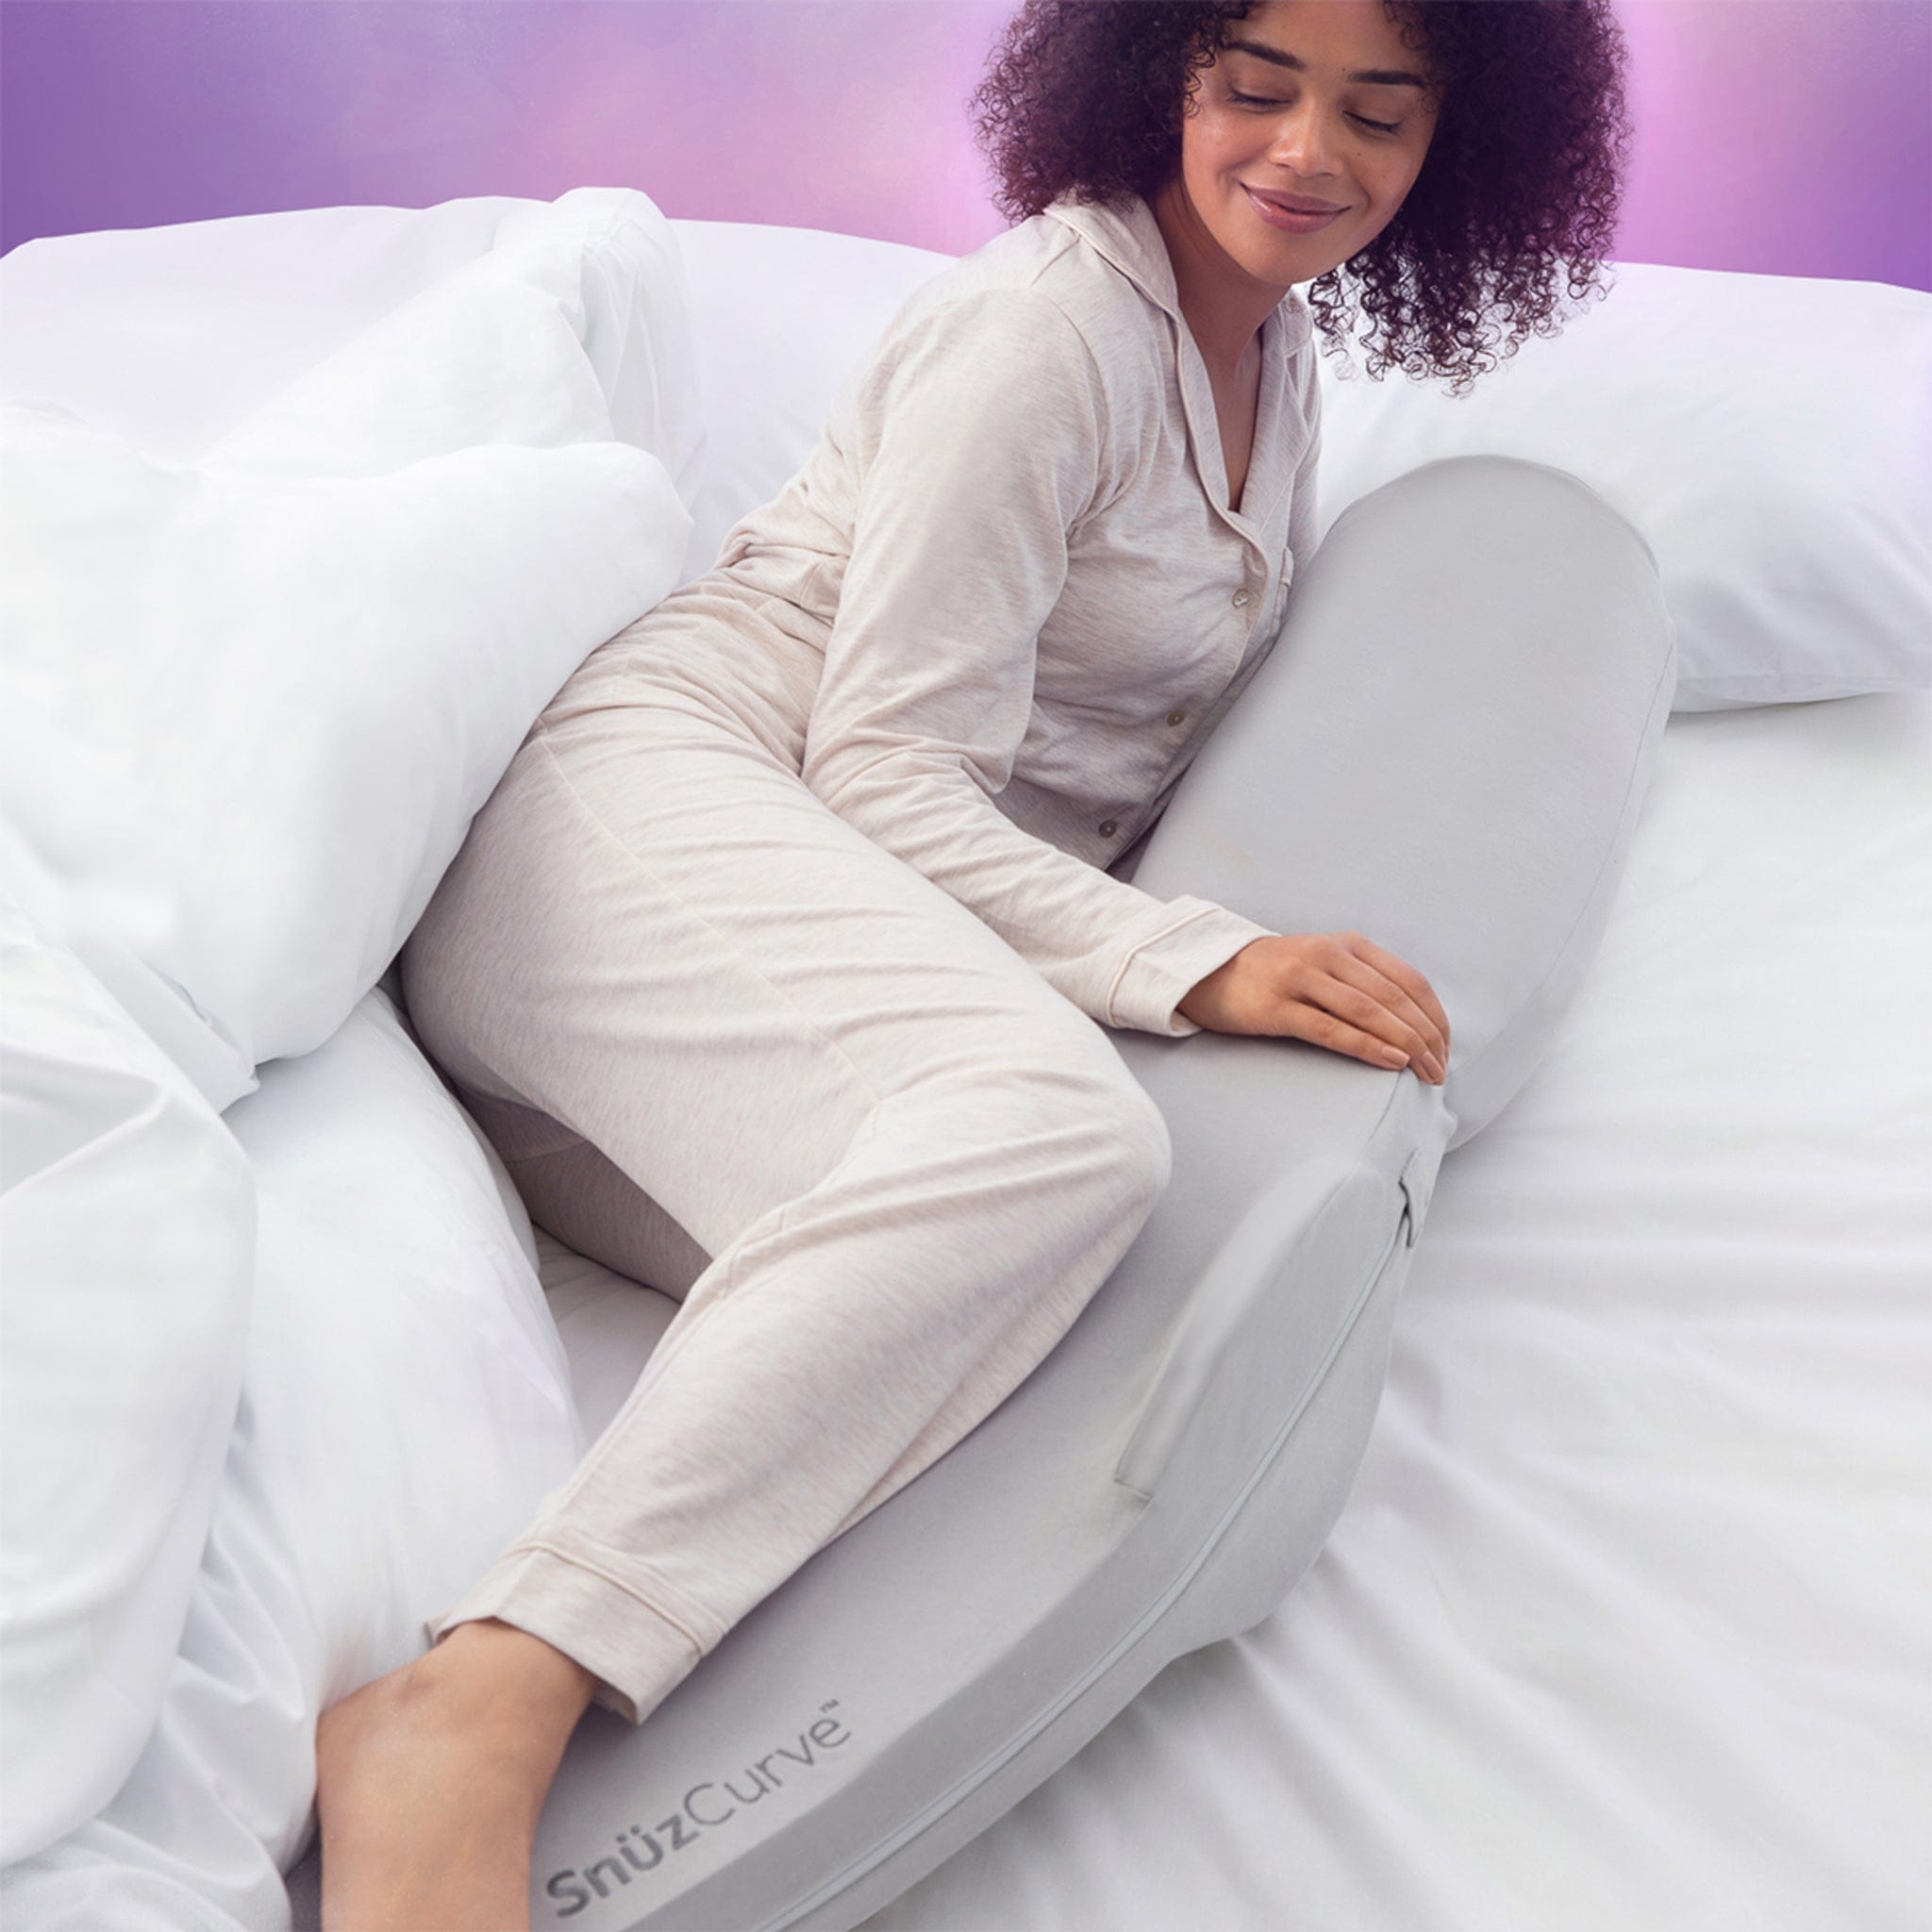 SnüzCurve Pregnancy Pillow in Grey PP01SCB 5060730244001